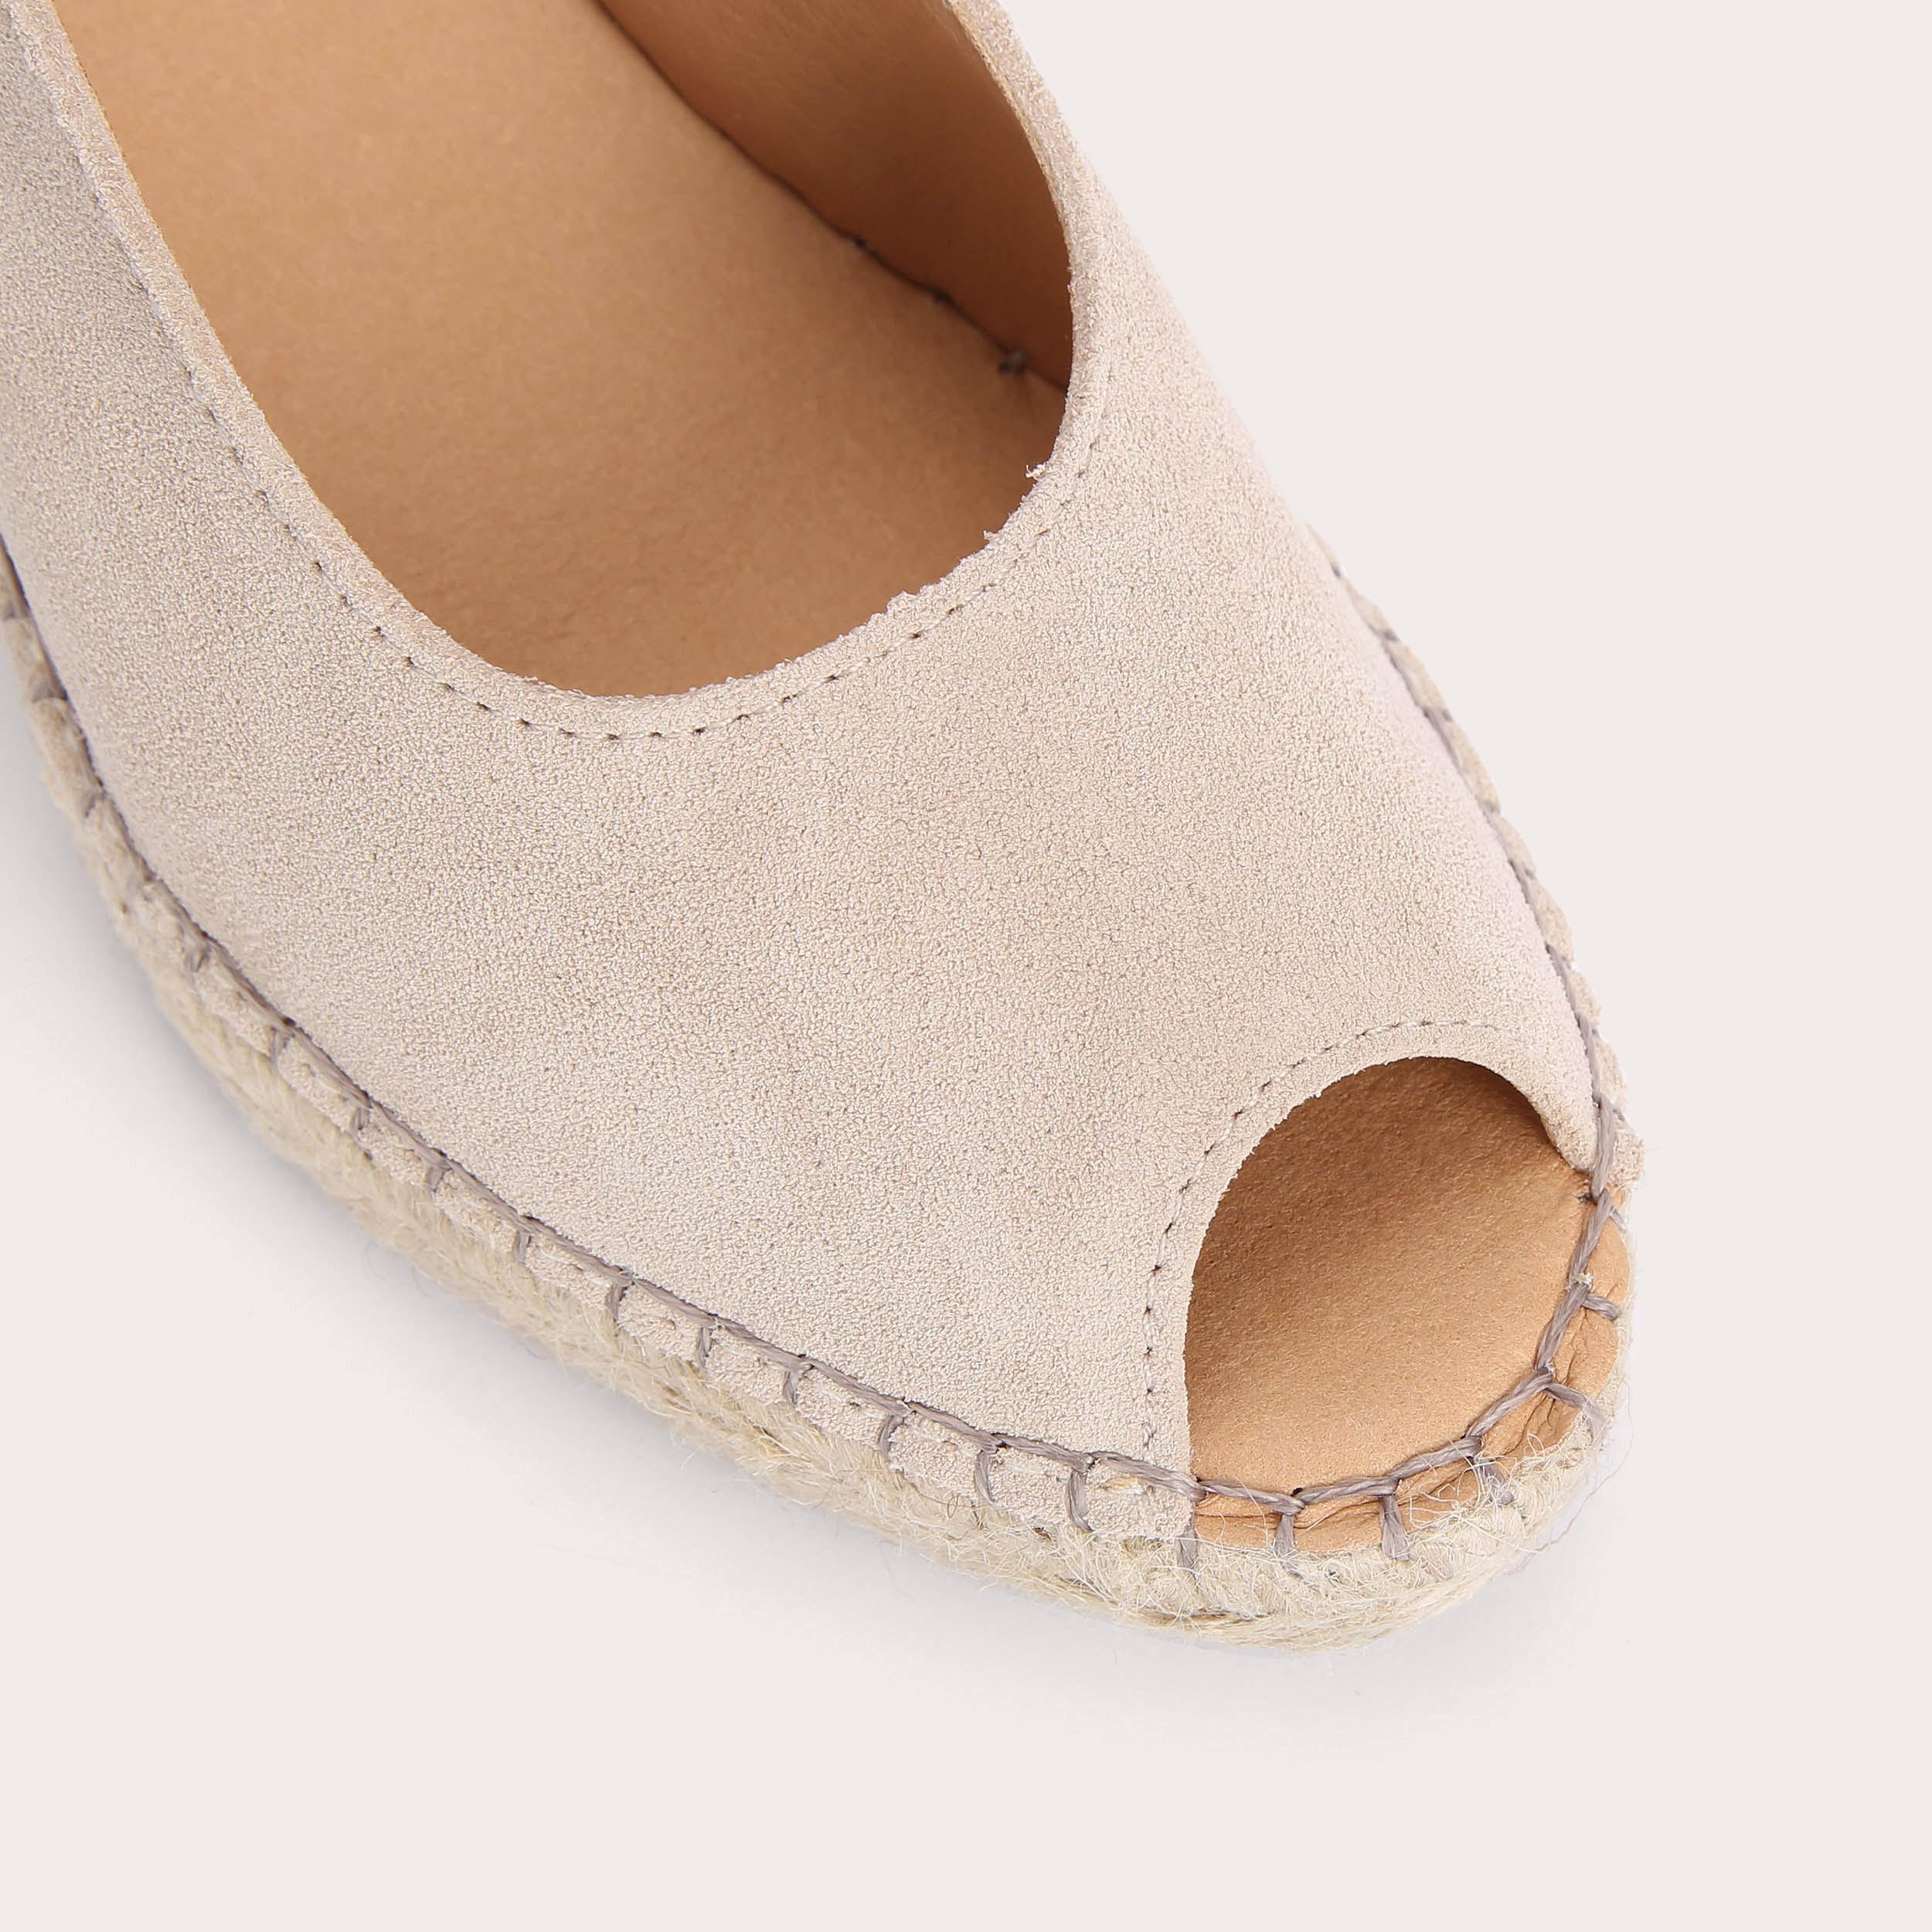 SHARON Taupe Suede Espadrille Wedge Sandals by CARVELA COMFORT